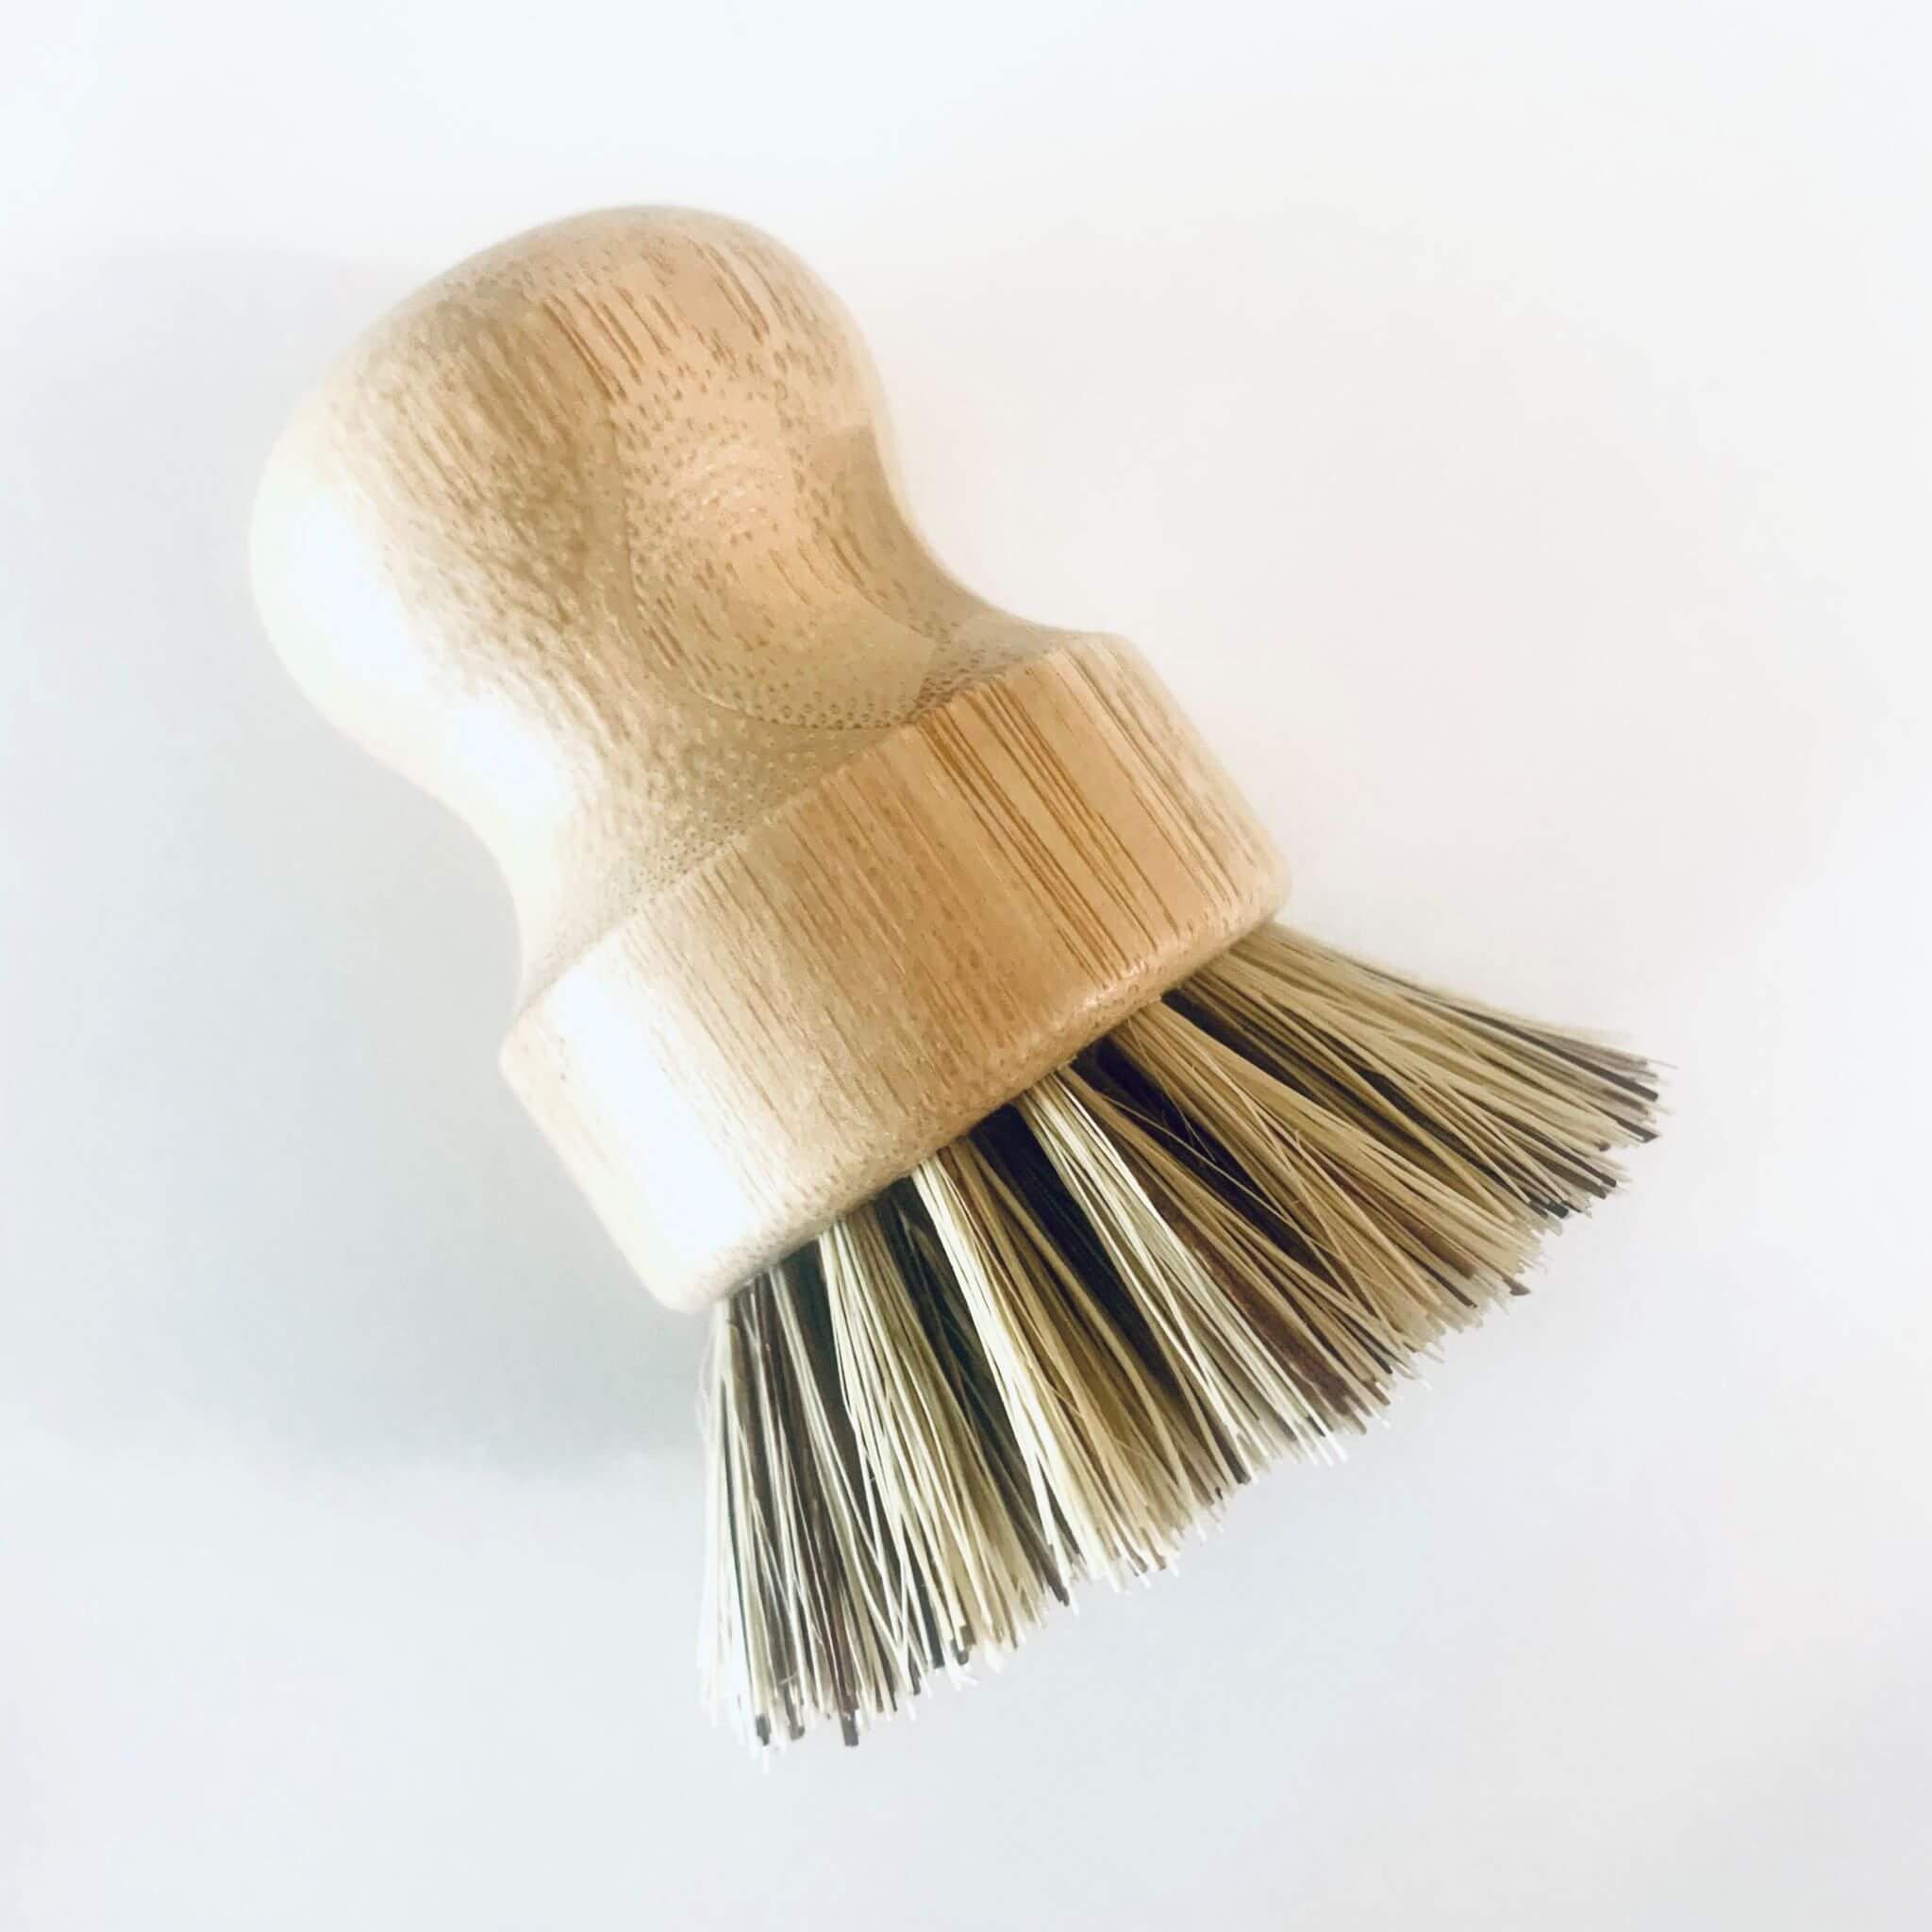 Bamboo, Sisal, and Coconut Dish + Pot Scrubber Pair